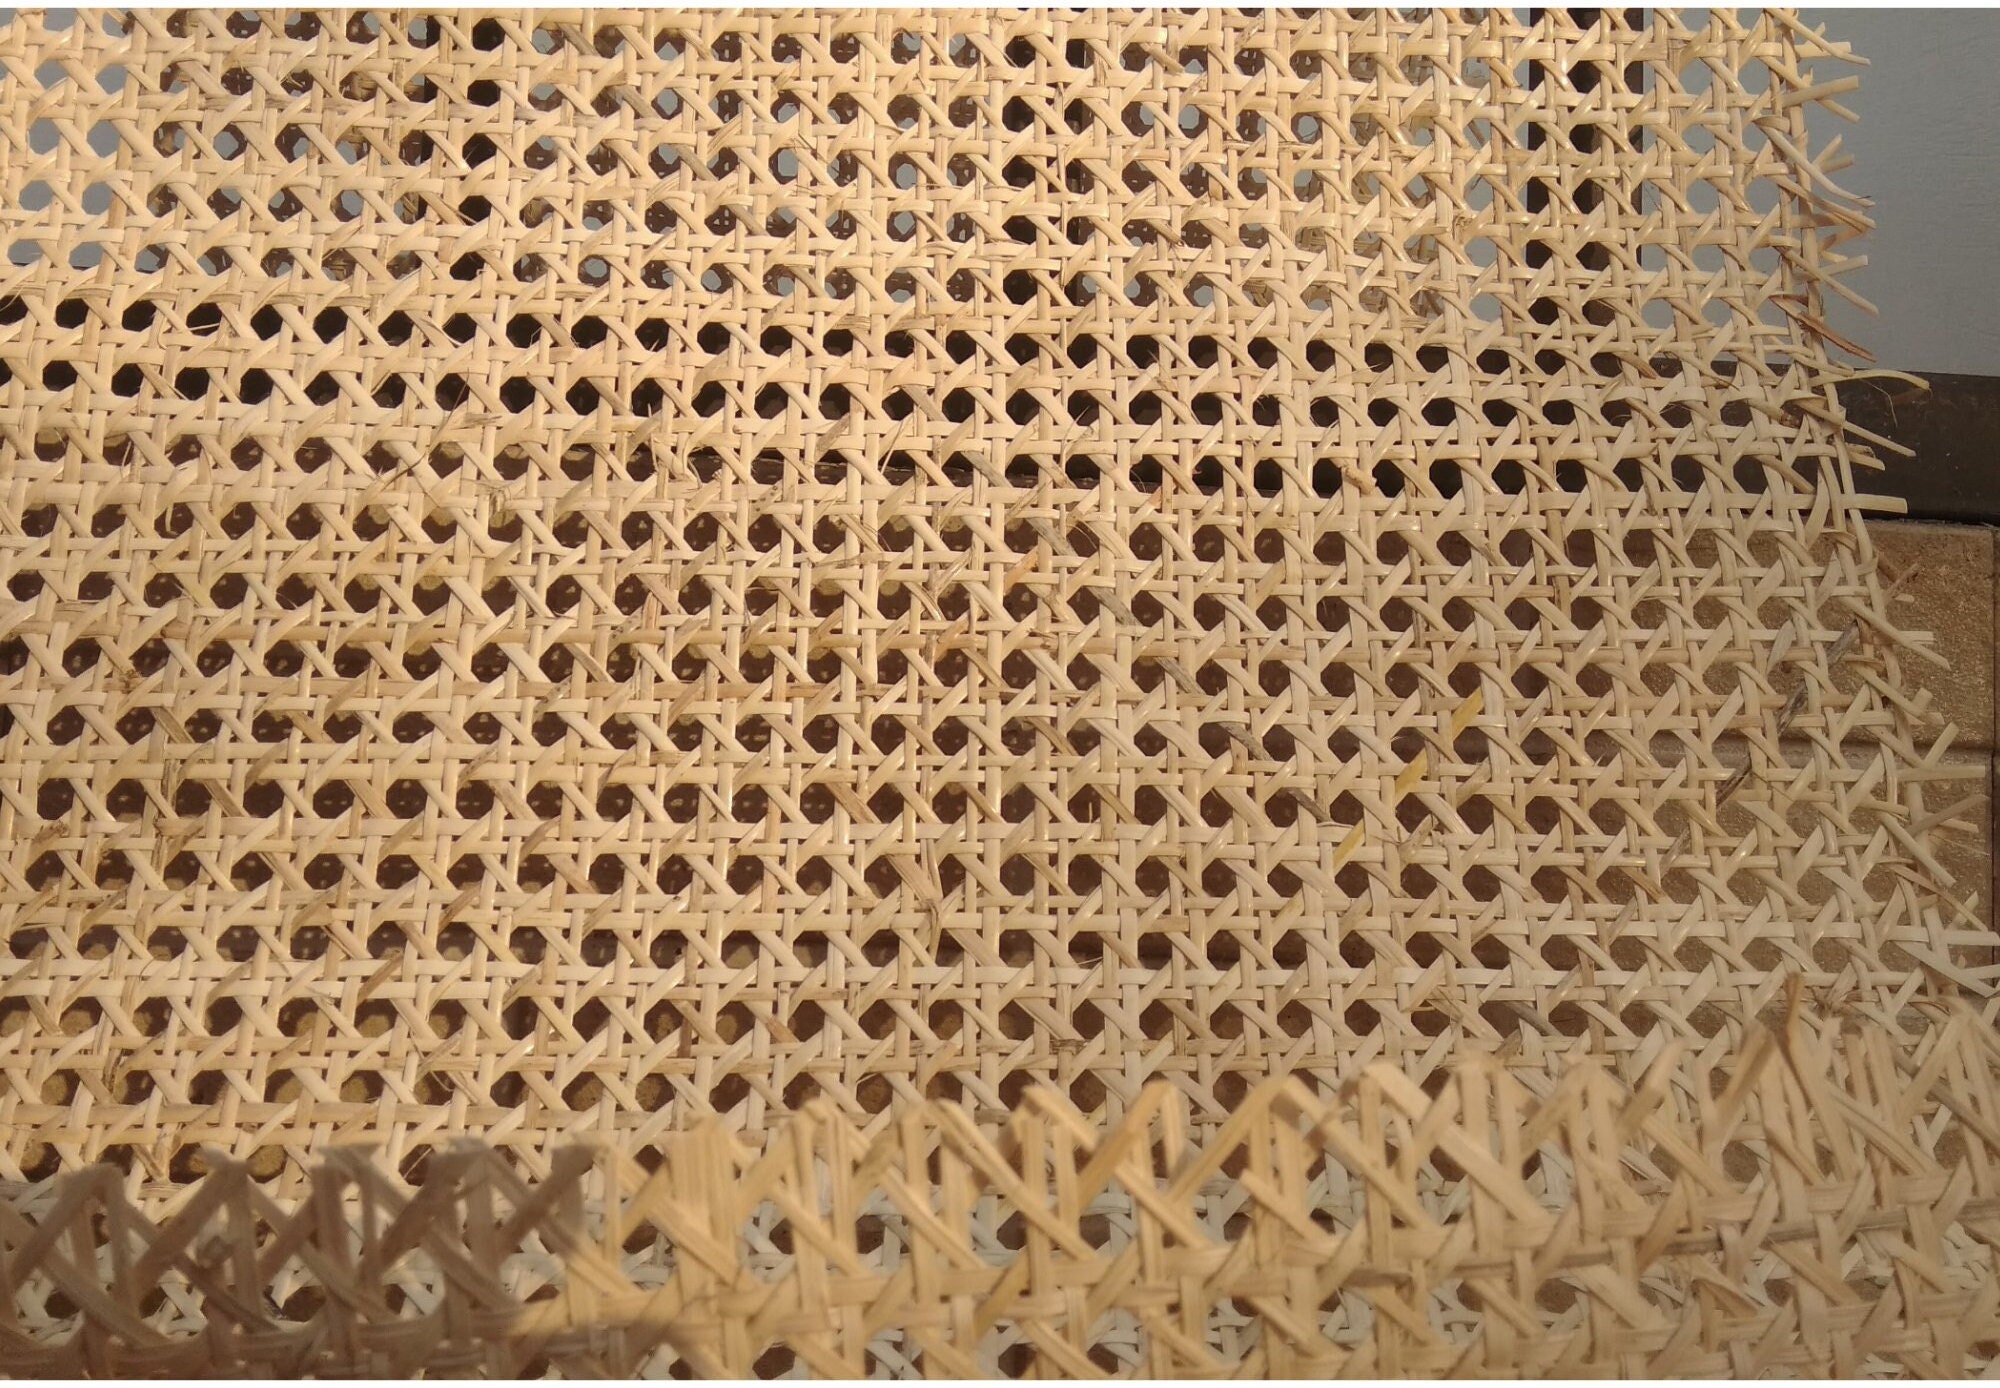 18 Wide, Natural Hexagonal Rattan Cane Webbing, DIY Caning Material,  Projects